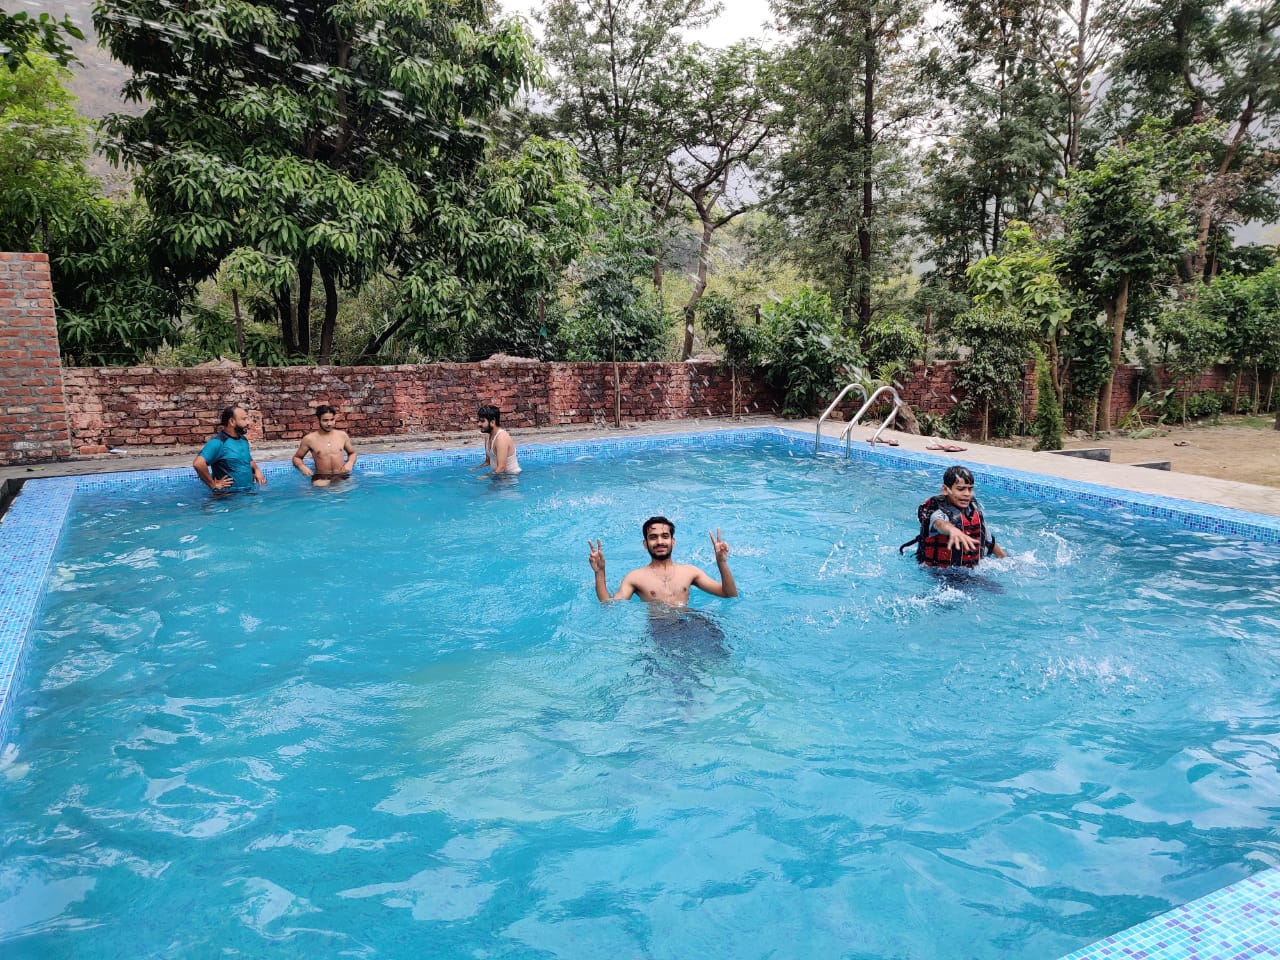 Swiss Camp with pool at Gange